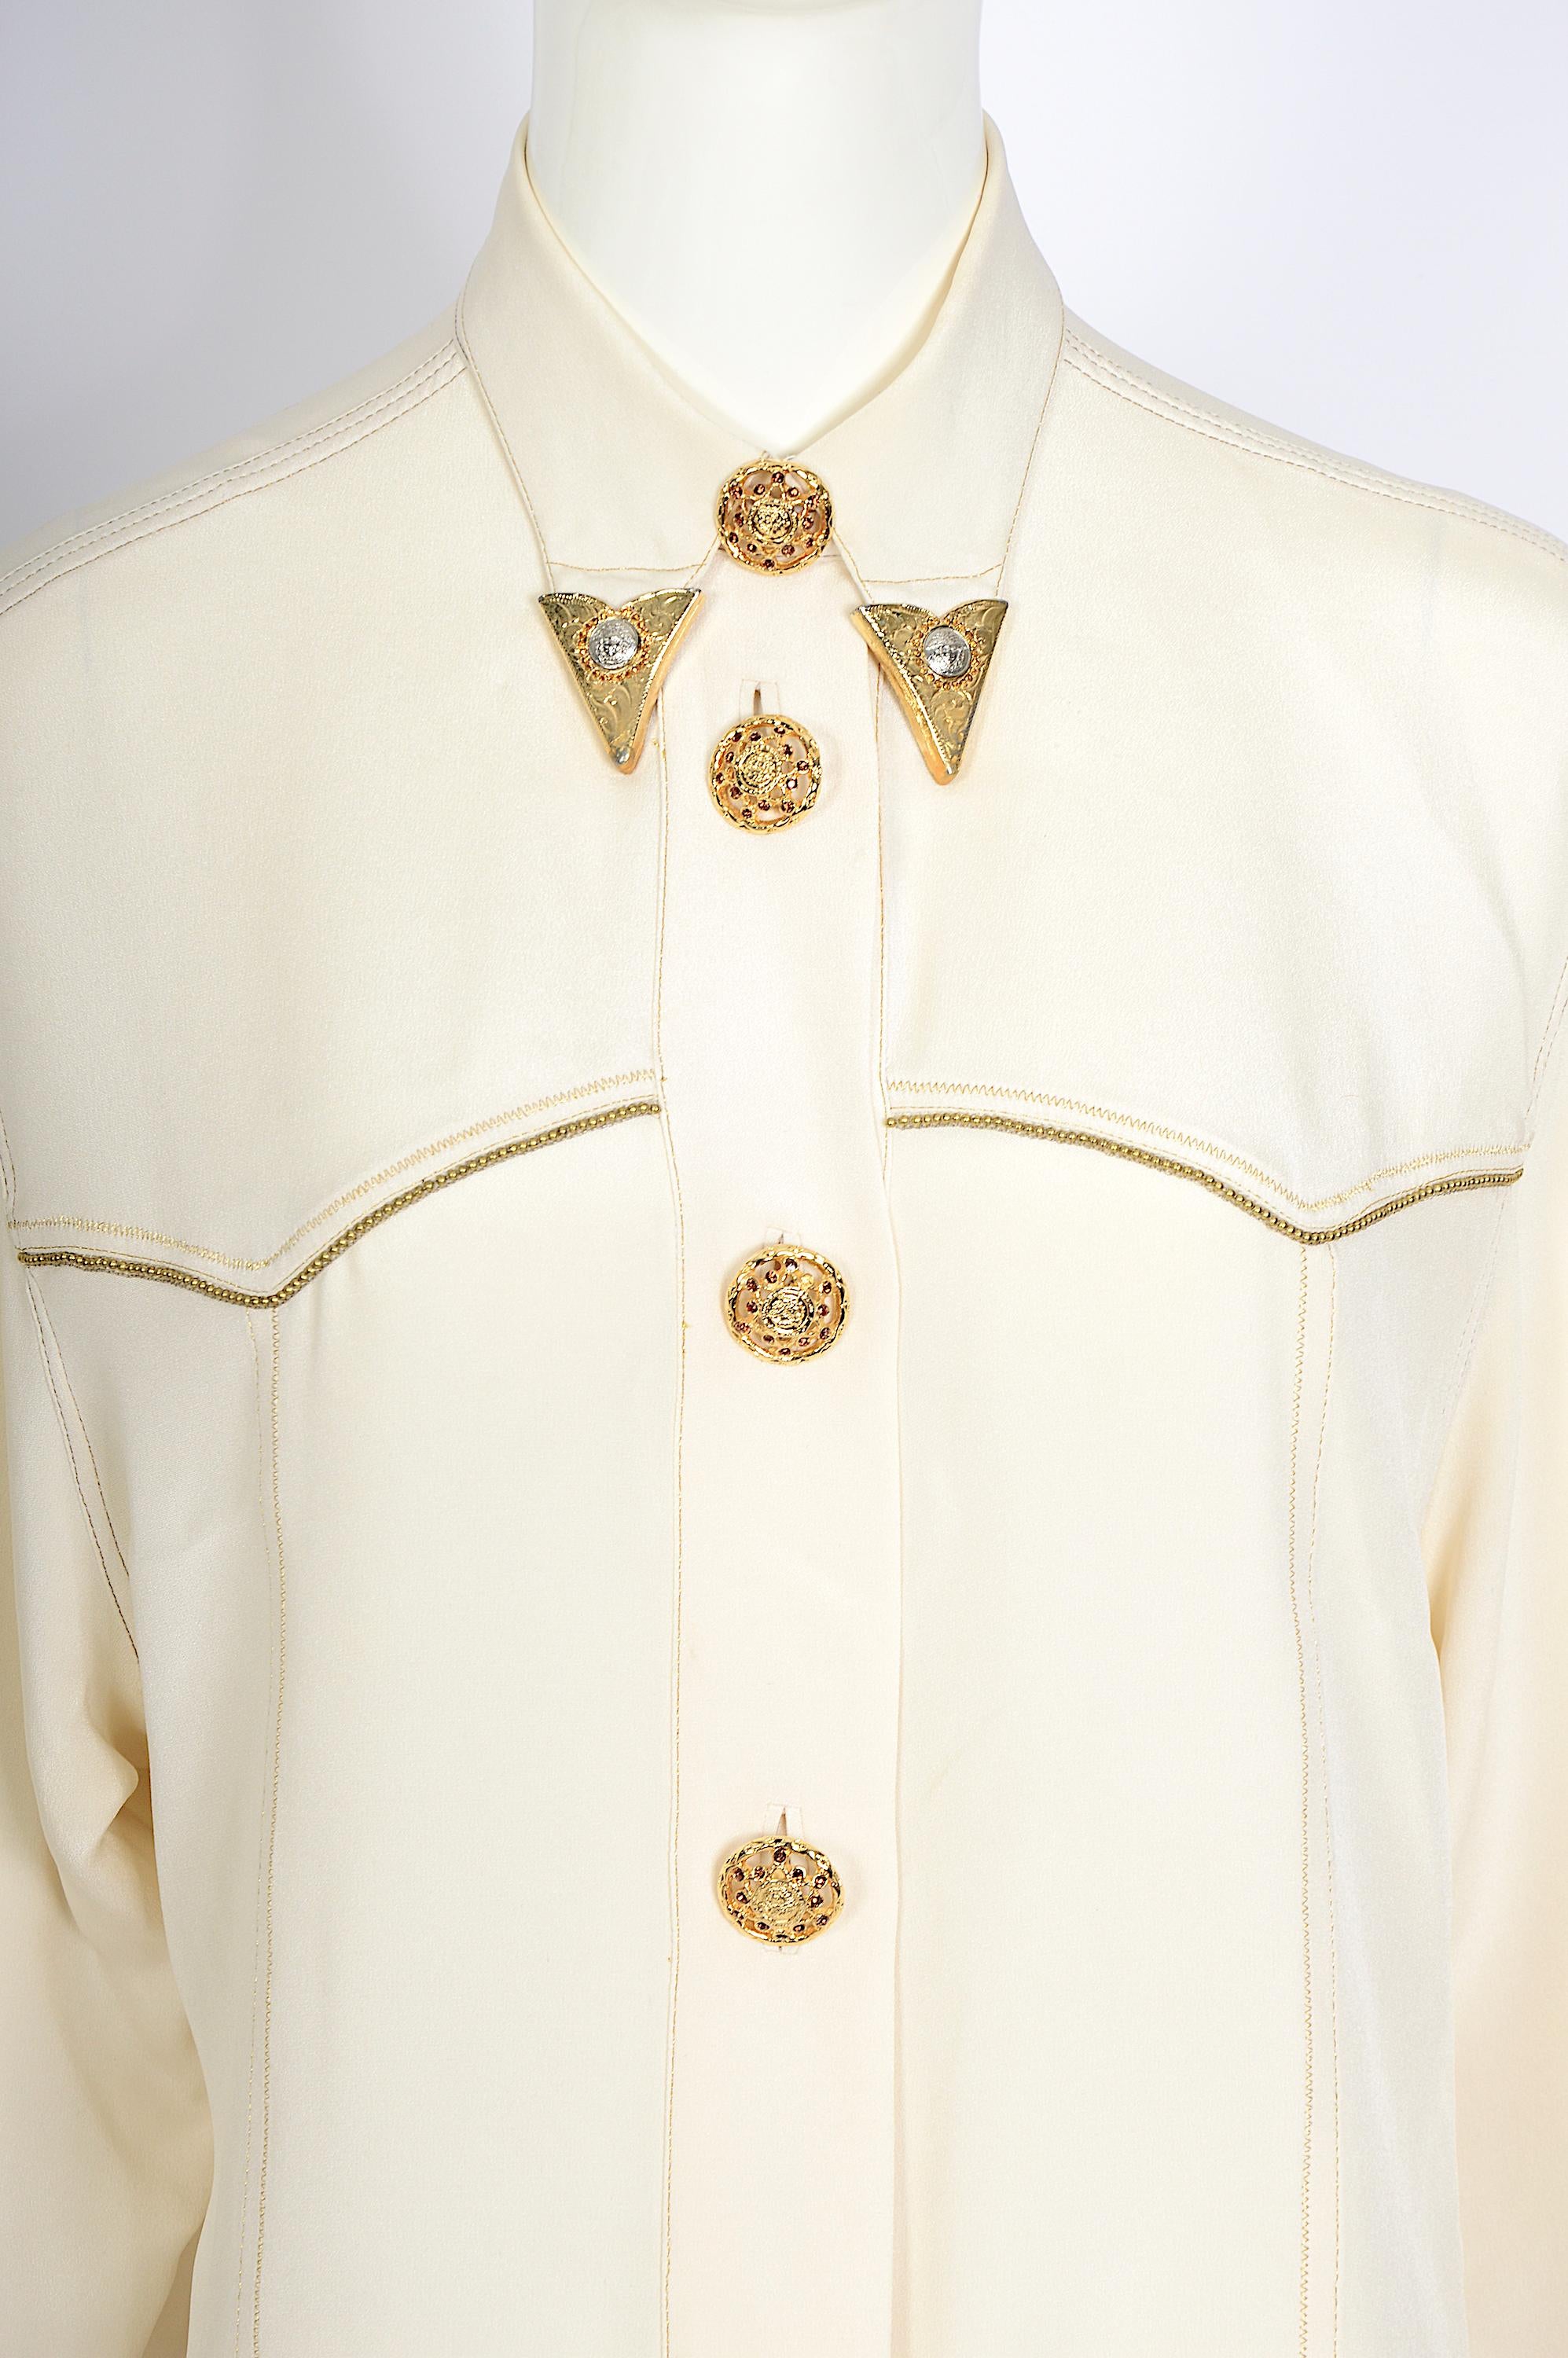 
Verlaine Vintage is introducing a beautiful cream silk blouse from the famous Gianni Versace Fall/Winter 1992 iconic Miss S&M collection – a personal favorite. 
As seen on Claudia Schiffer. 
This fantastic Gianni Versace Couture  blouse is still in